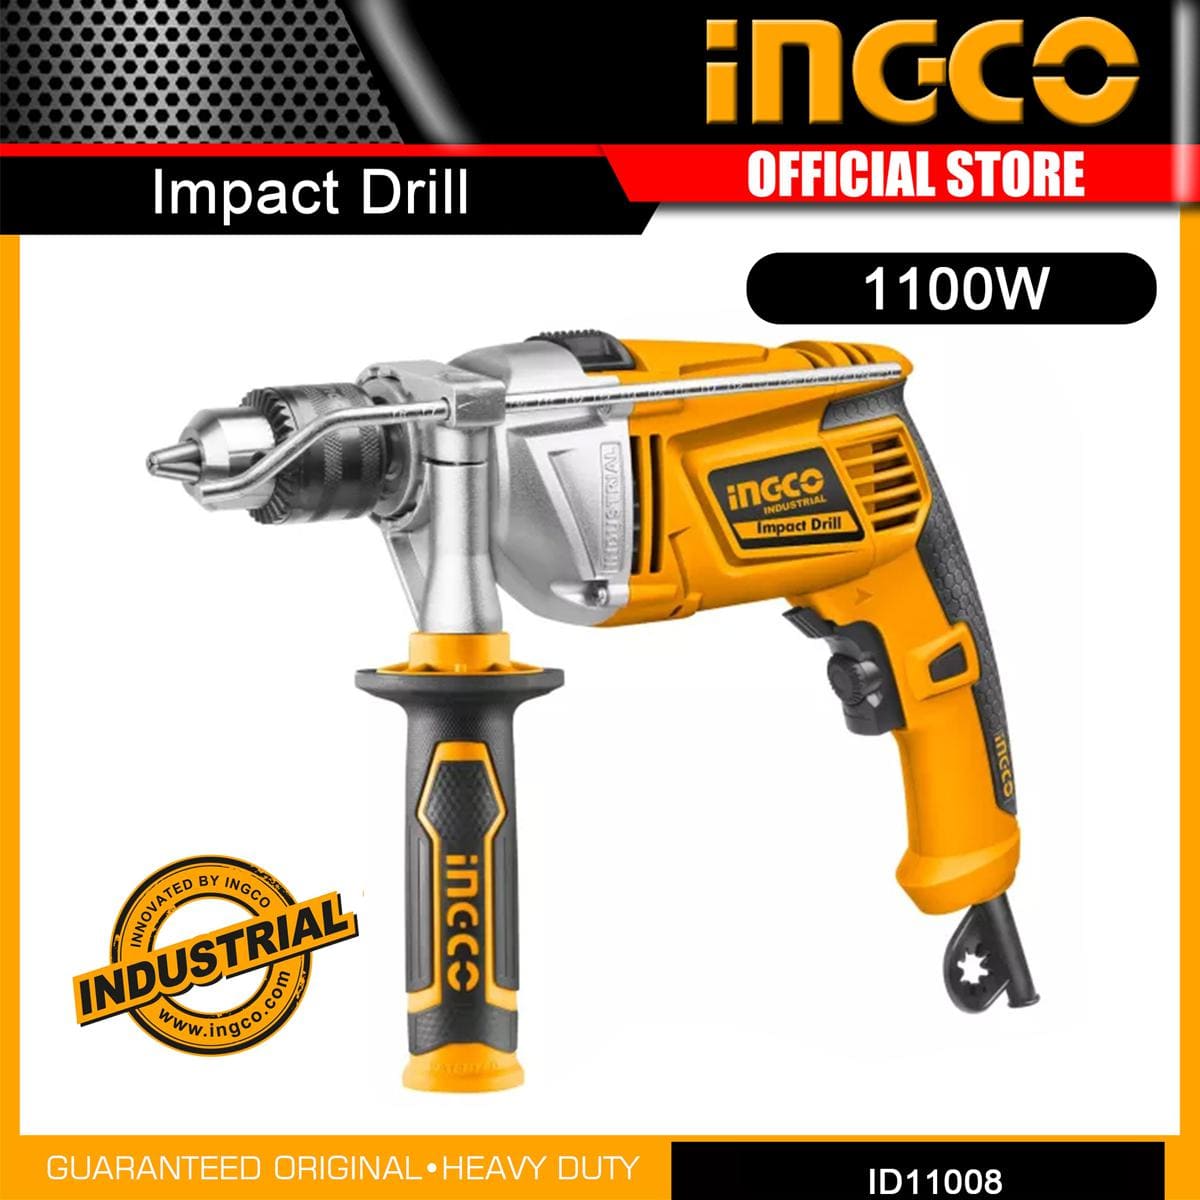 Ingco Hammer Impact Drill 13mm 1100W - ID11008 - Buy Online in Accra, Ghana at Supply Master Drill Buy Tools hardware Building materials